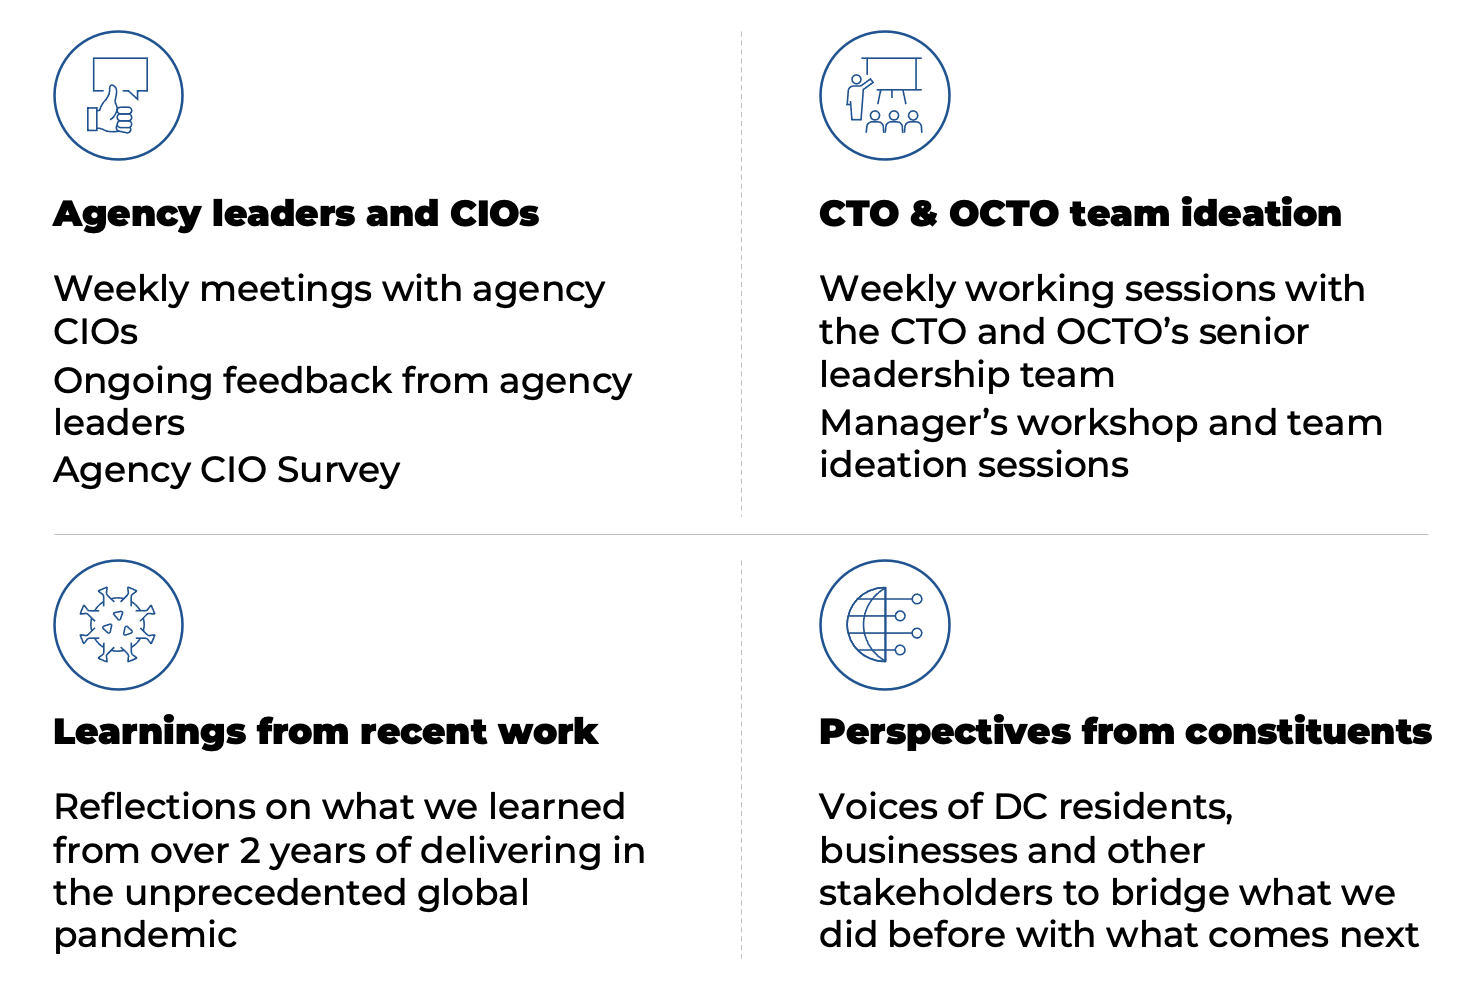 Agency leaders and CIOs, CTO and OCTO team ideation, Learnings from recent work, Perspectives from constituents